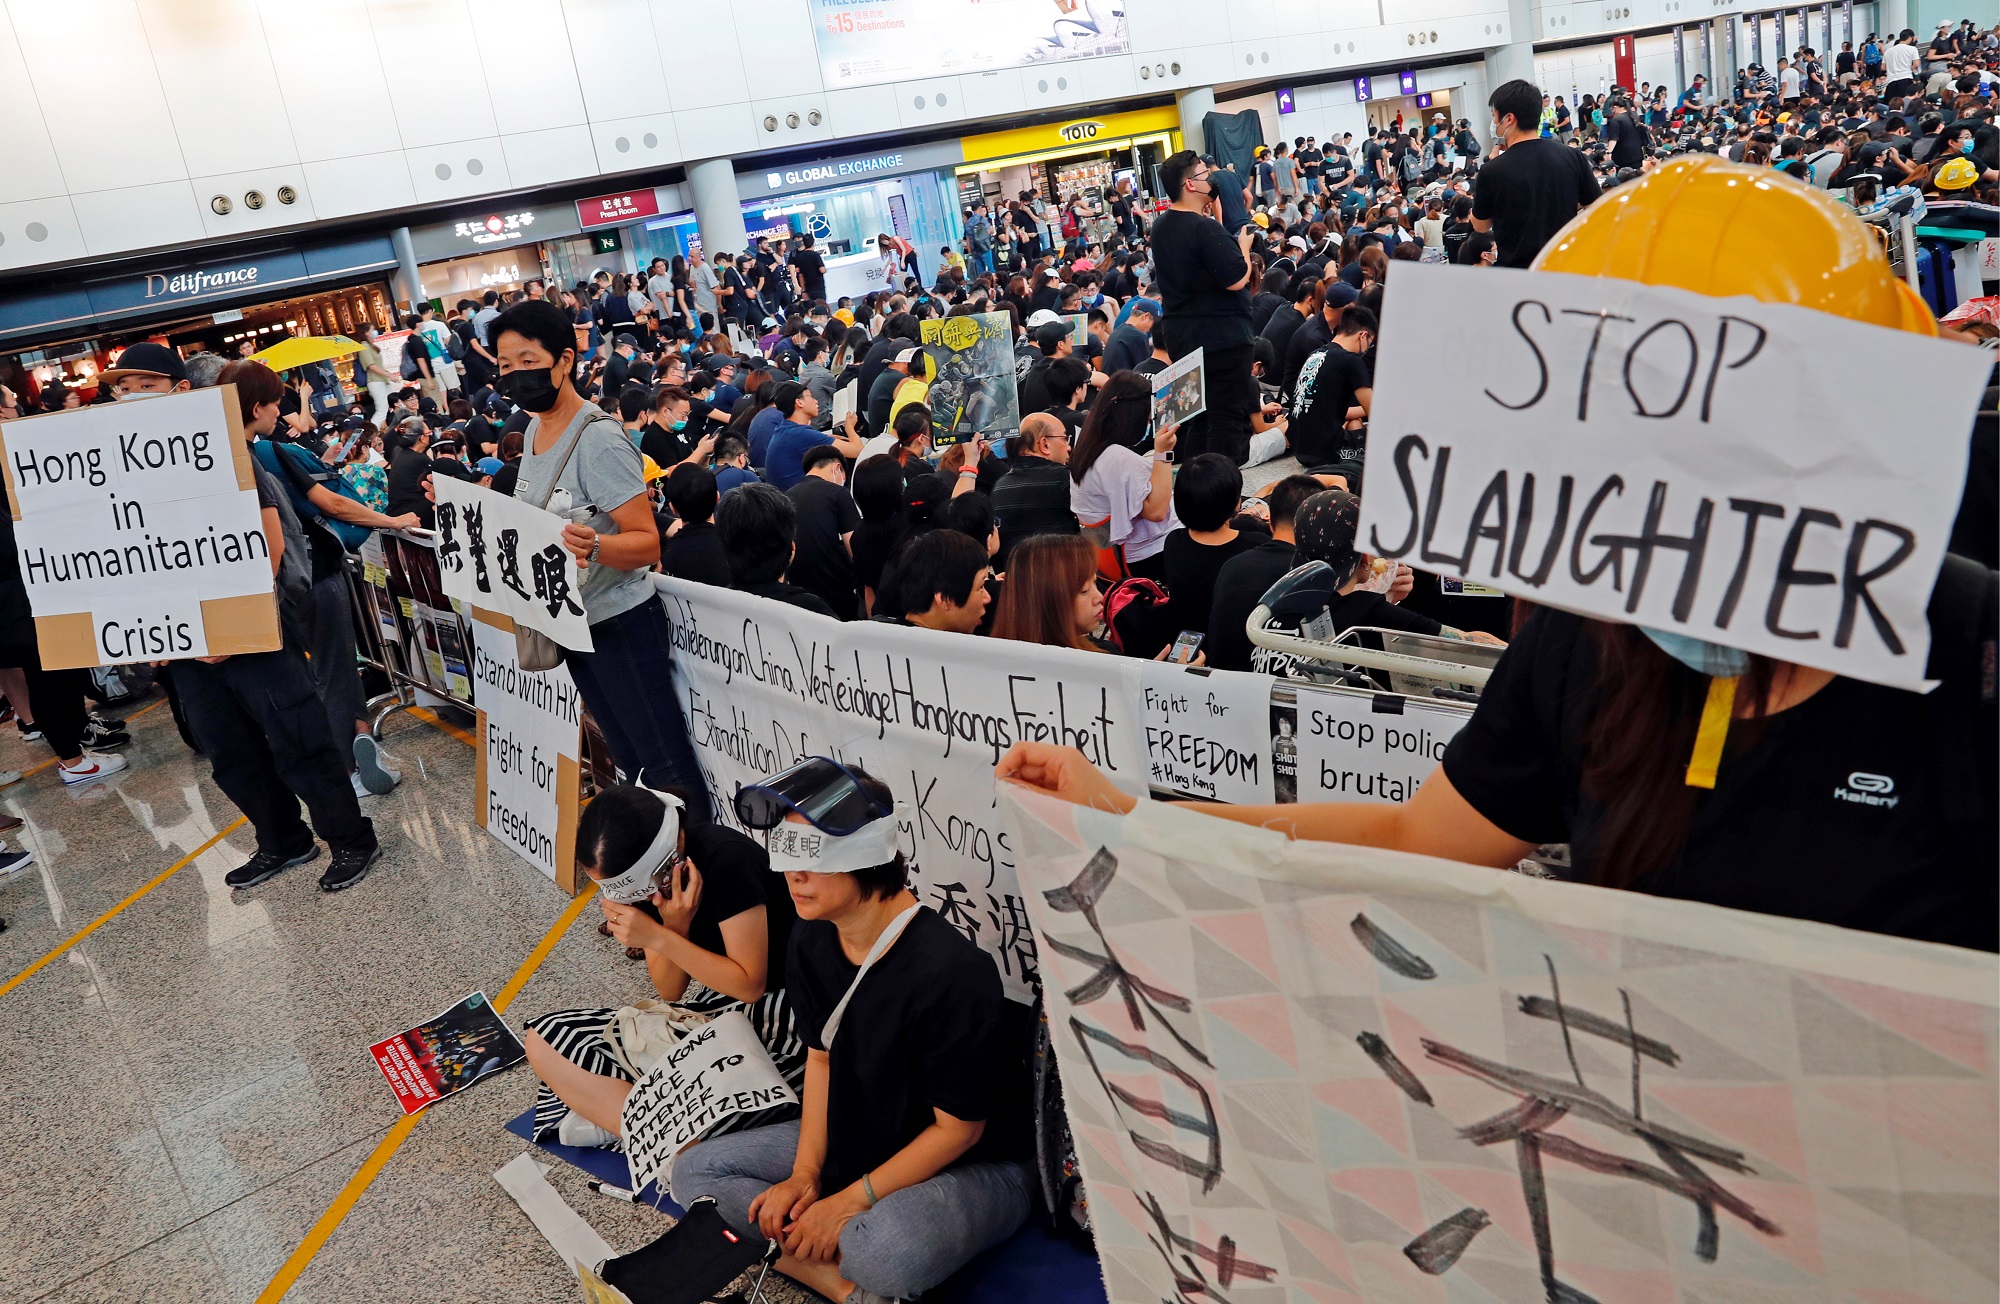 Anti-extradition bill protesters attend a mass demonstration after a woman was shot in the eye during a protest at Hong Kong International Airport, in Hong Kong, China August 12, 2019. REUTERS/Tyrone Siu